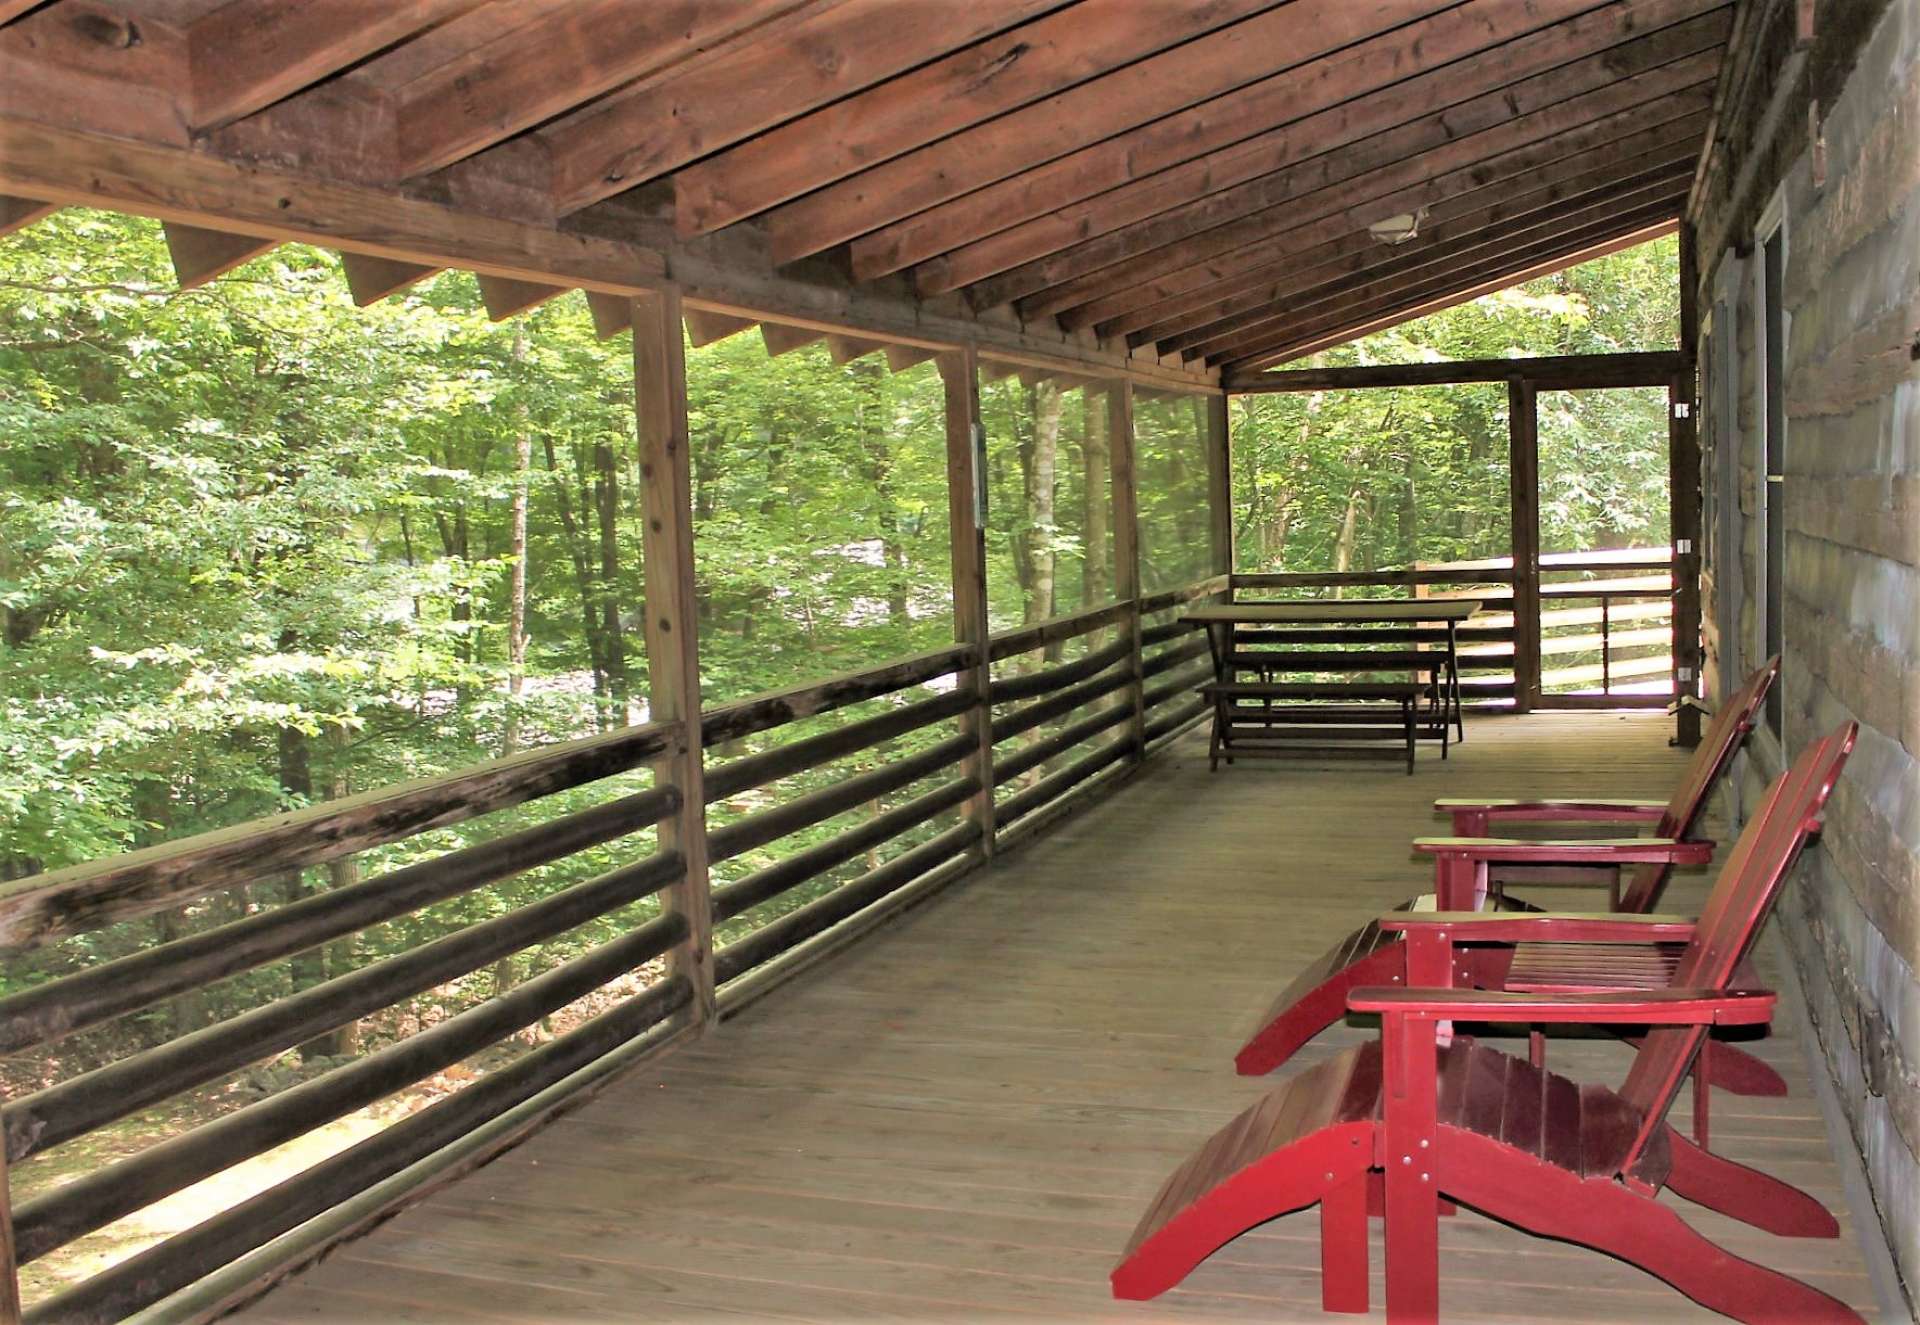 I would guess that you will spend most of your time entertaining family and friends on this spacious covered and screened porch where you can host fabulous parties or simply relax and listen to the babbling creek.